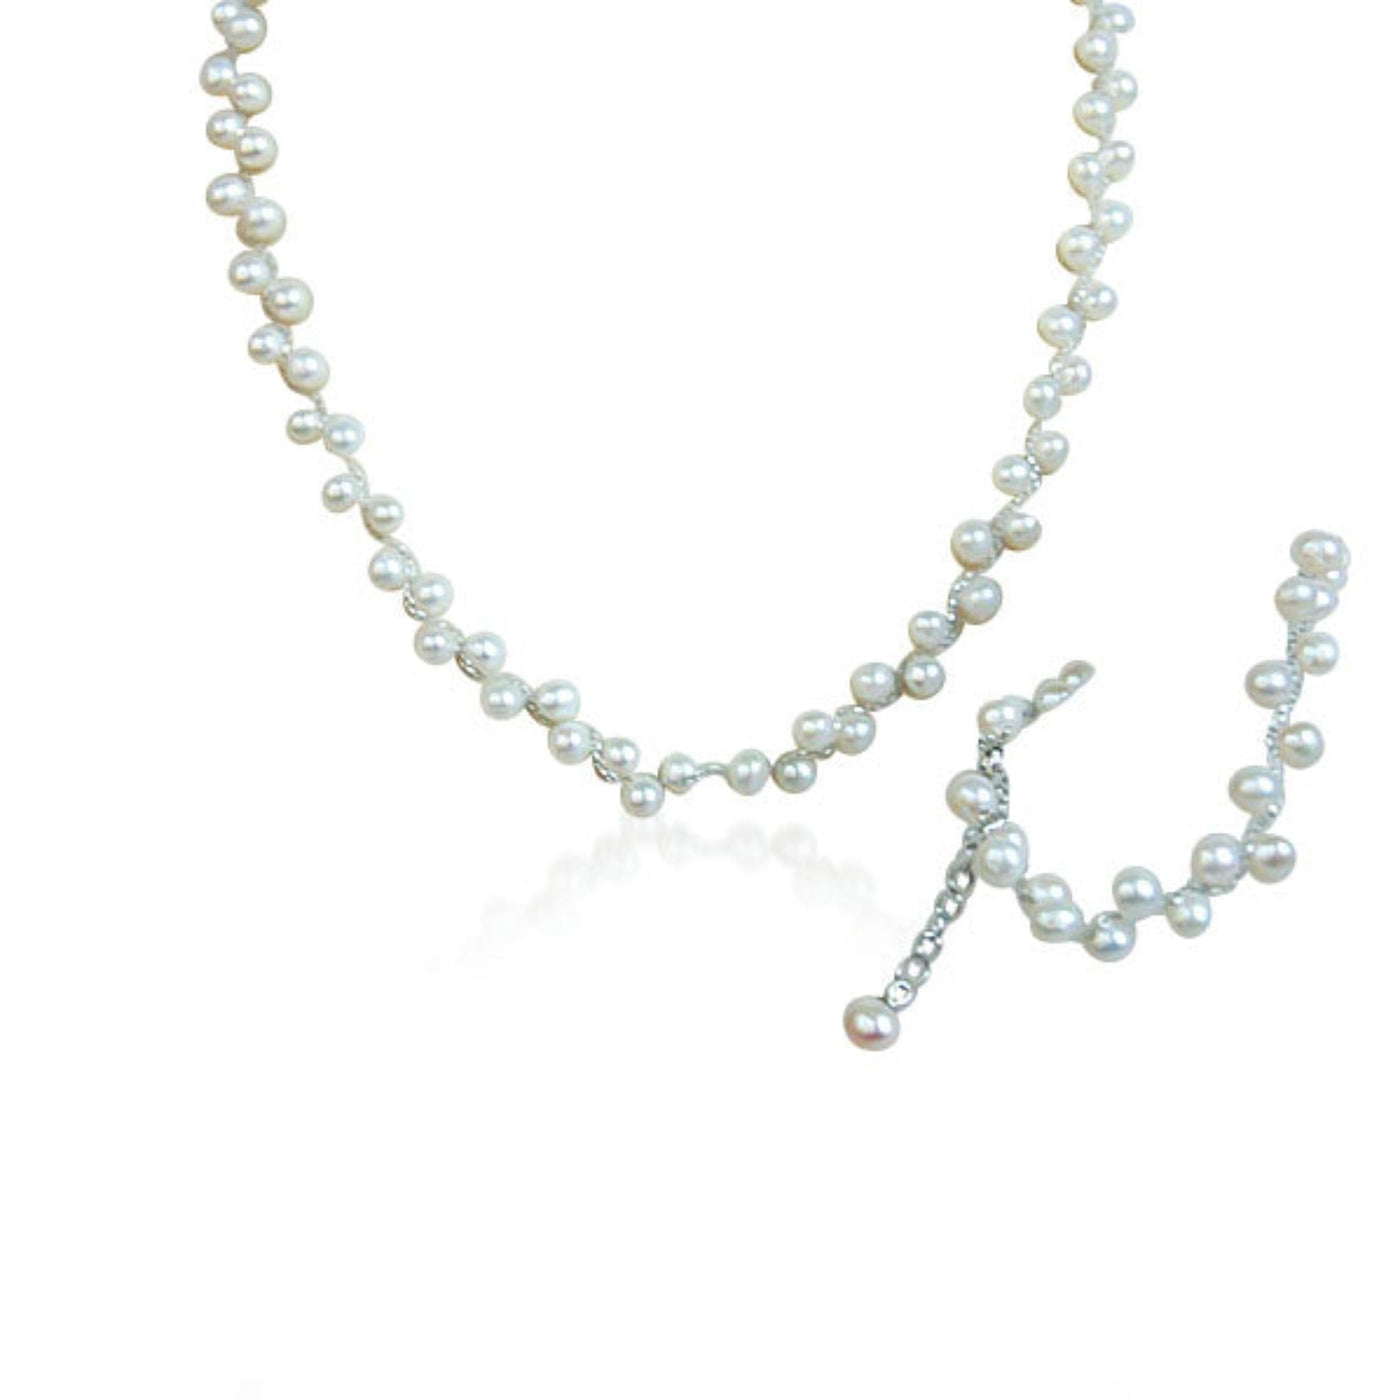 Dancing Pearls Necklace and Bracelet Set - Capsul